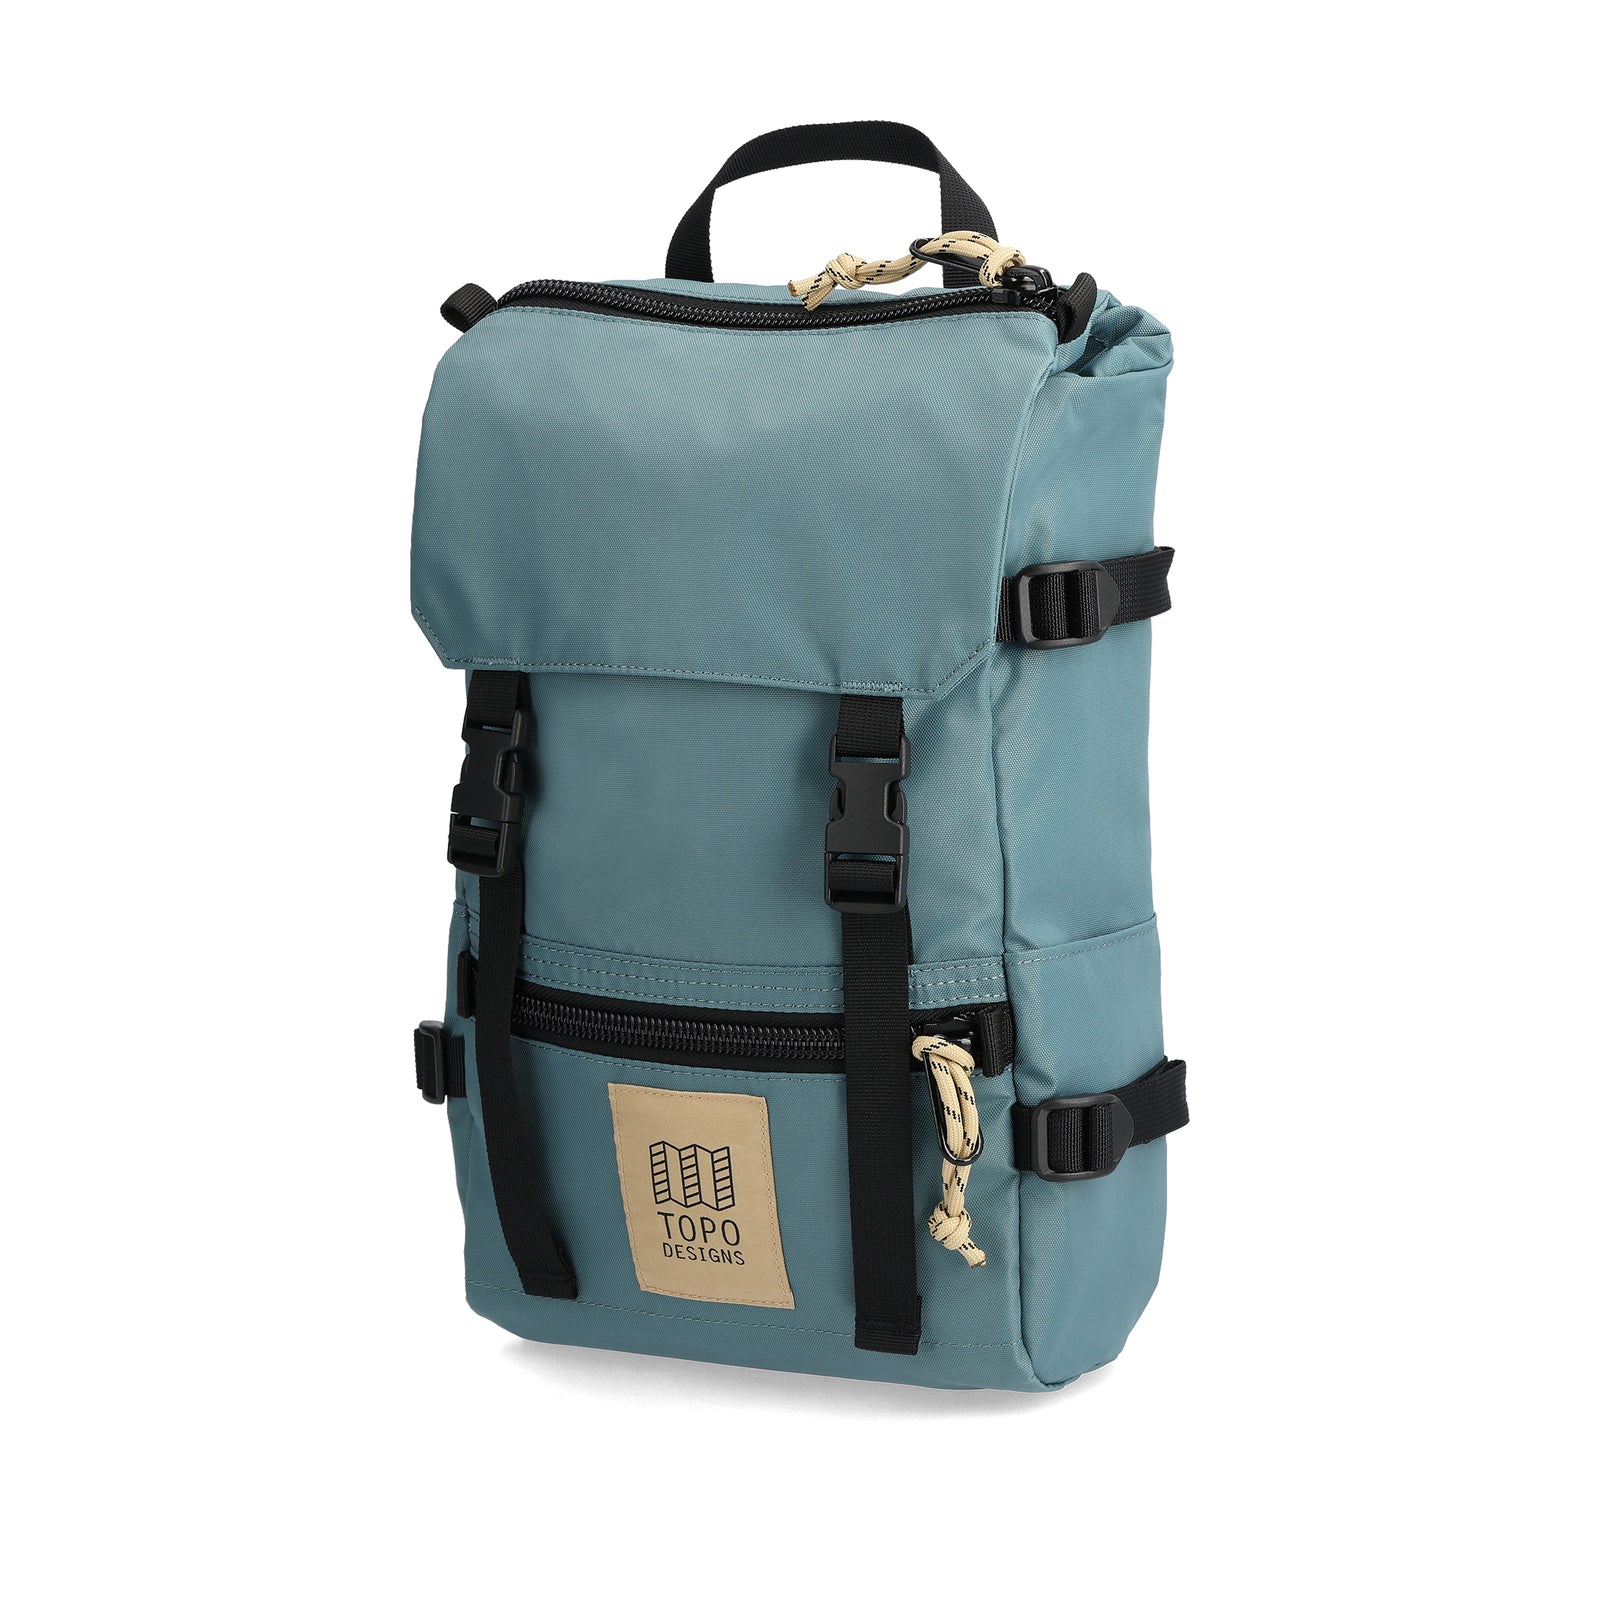 Front View of Topo Designs Rover Pack Mini in "Sea Pine"